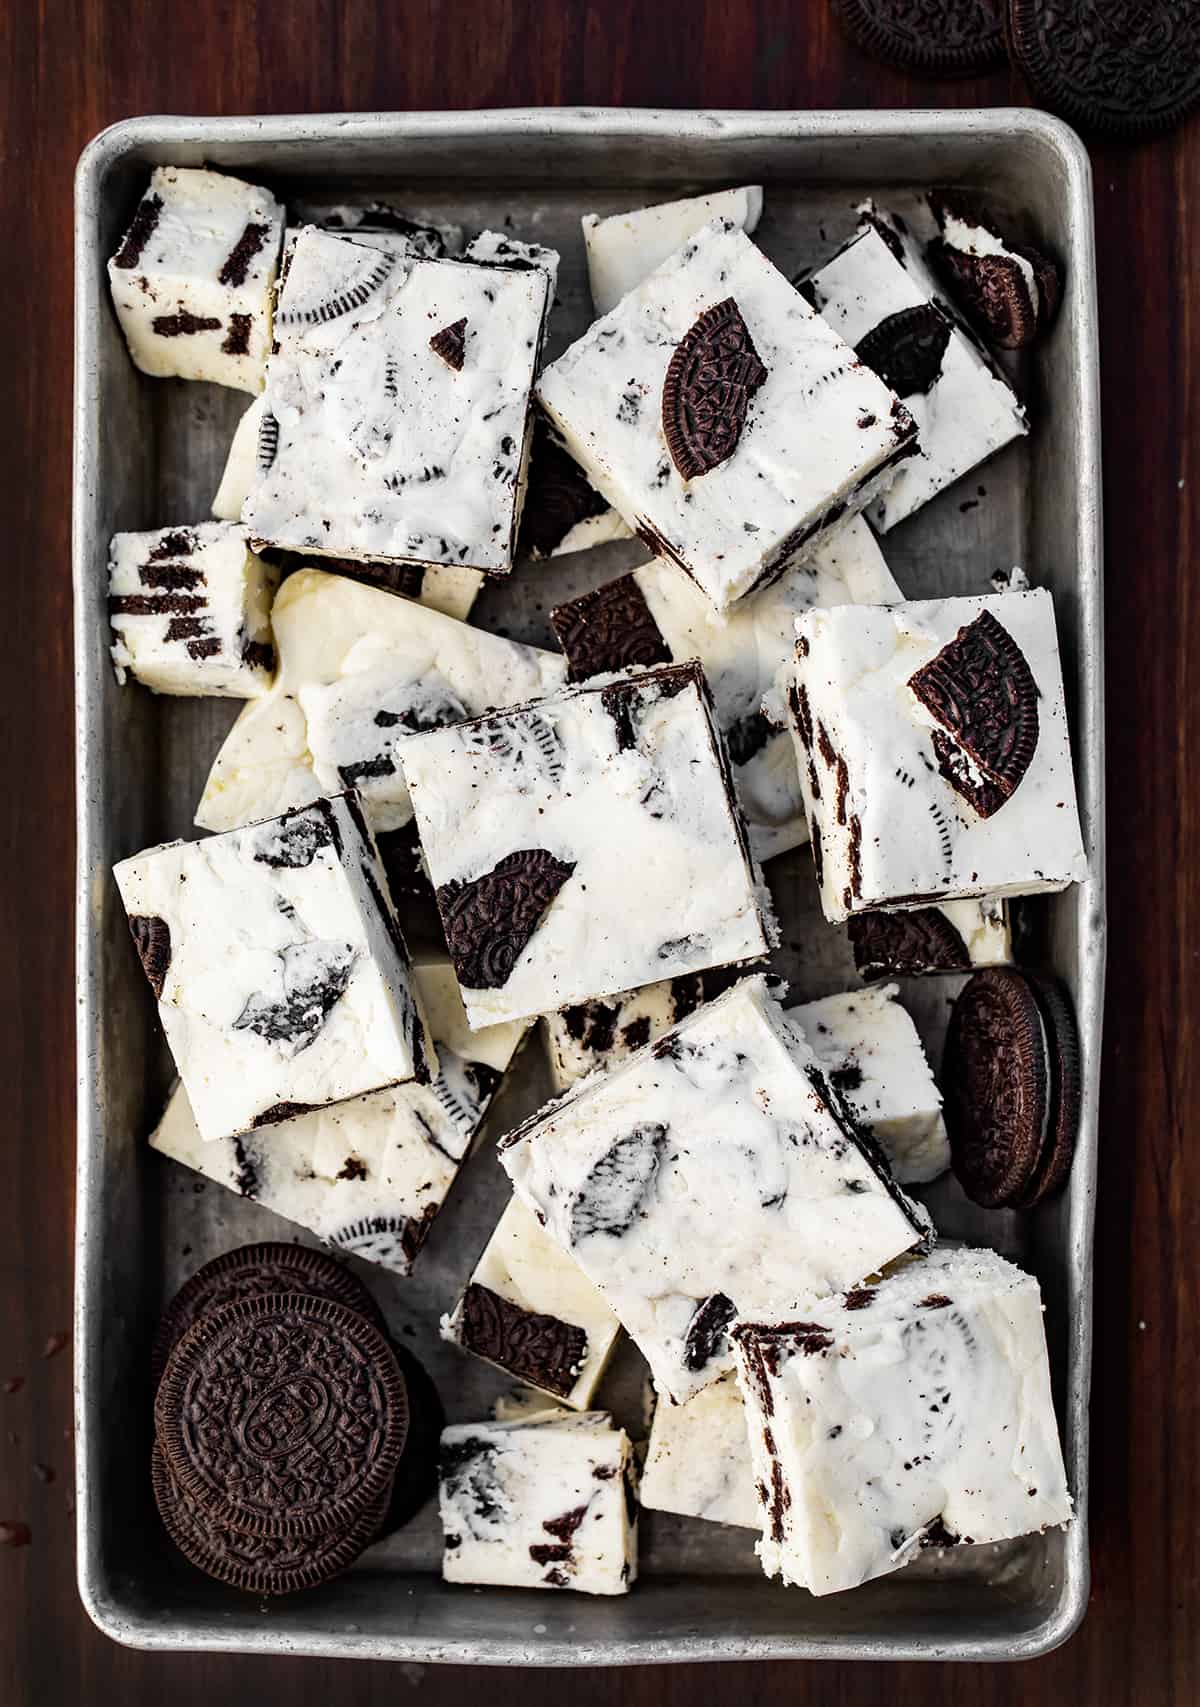 Pan of Cookies and Cream Fudge Cut Into Pieces with Some Oreos Near the Fudge.